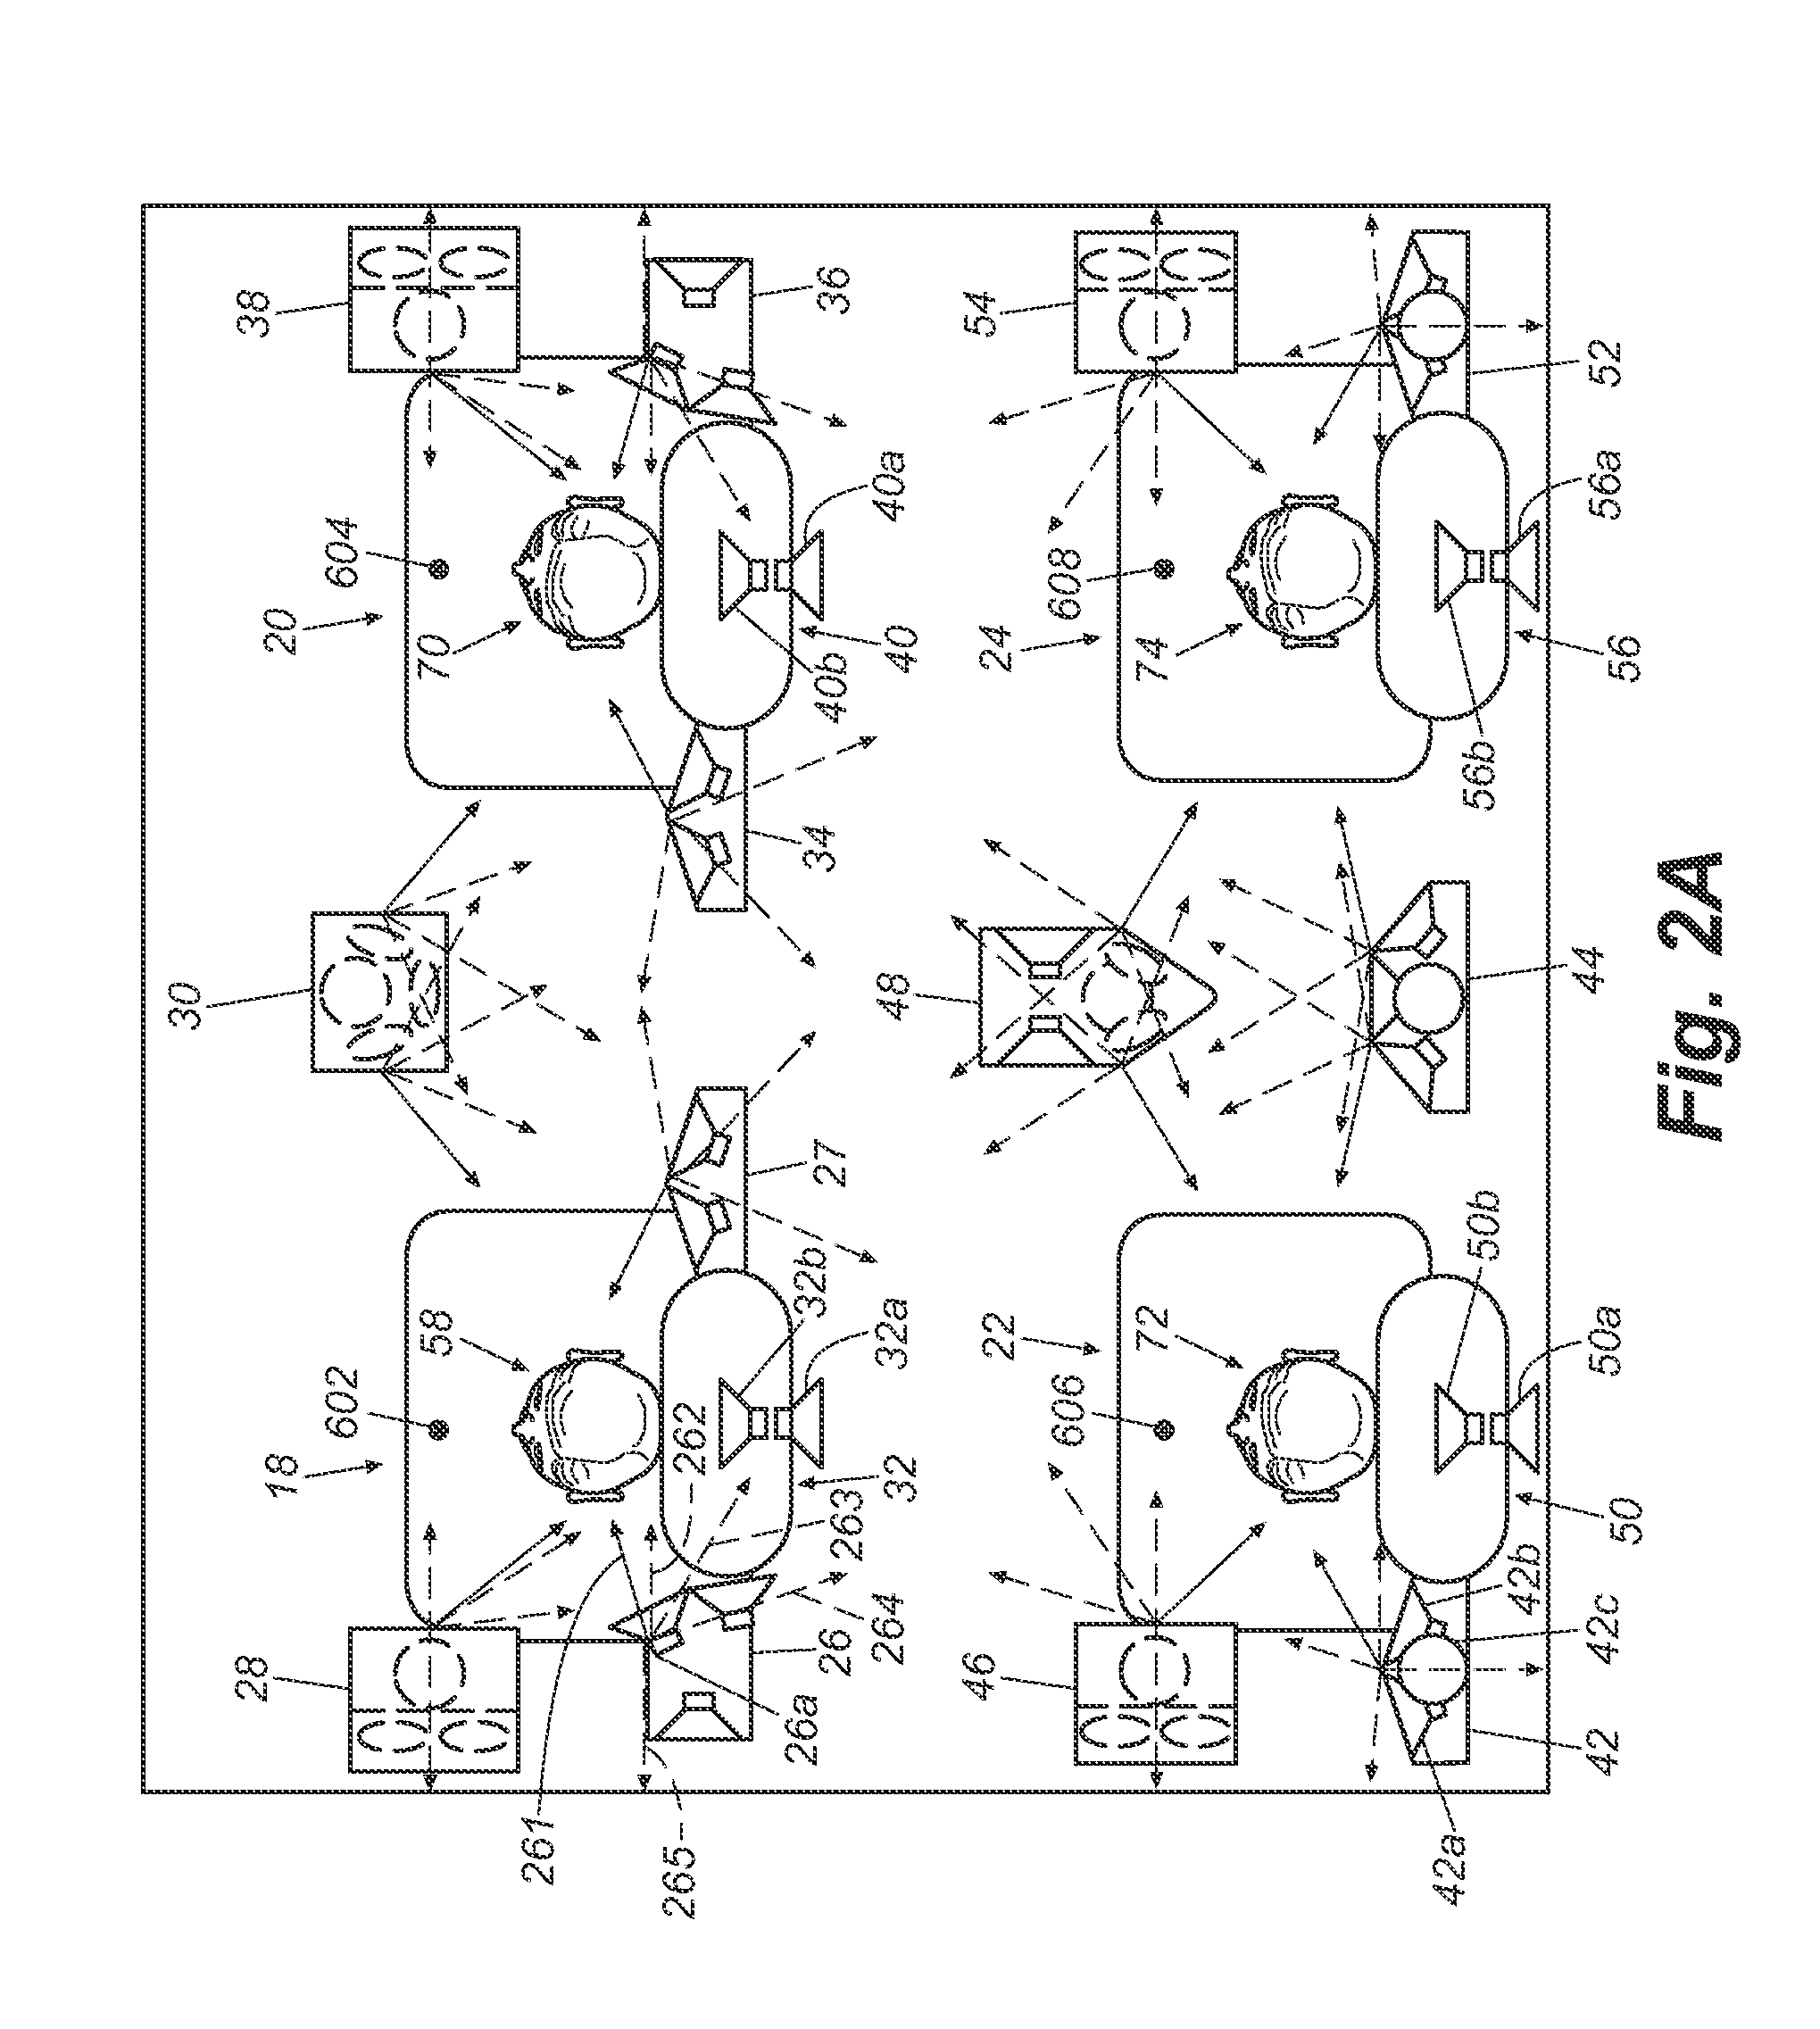 System and method for directionally radiating sound